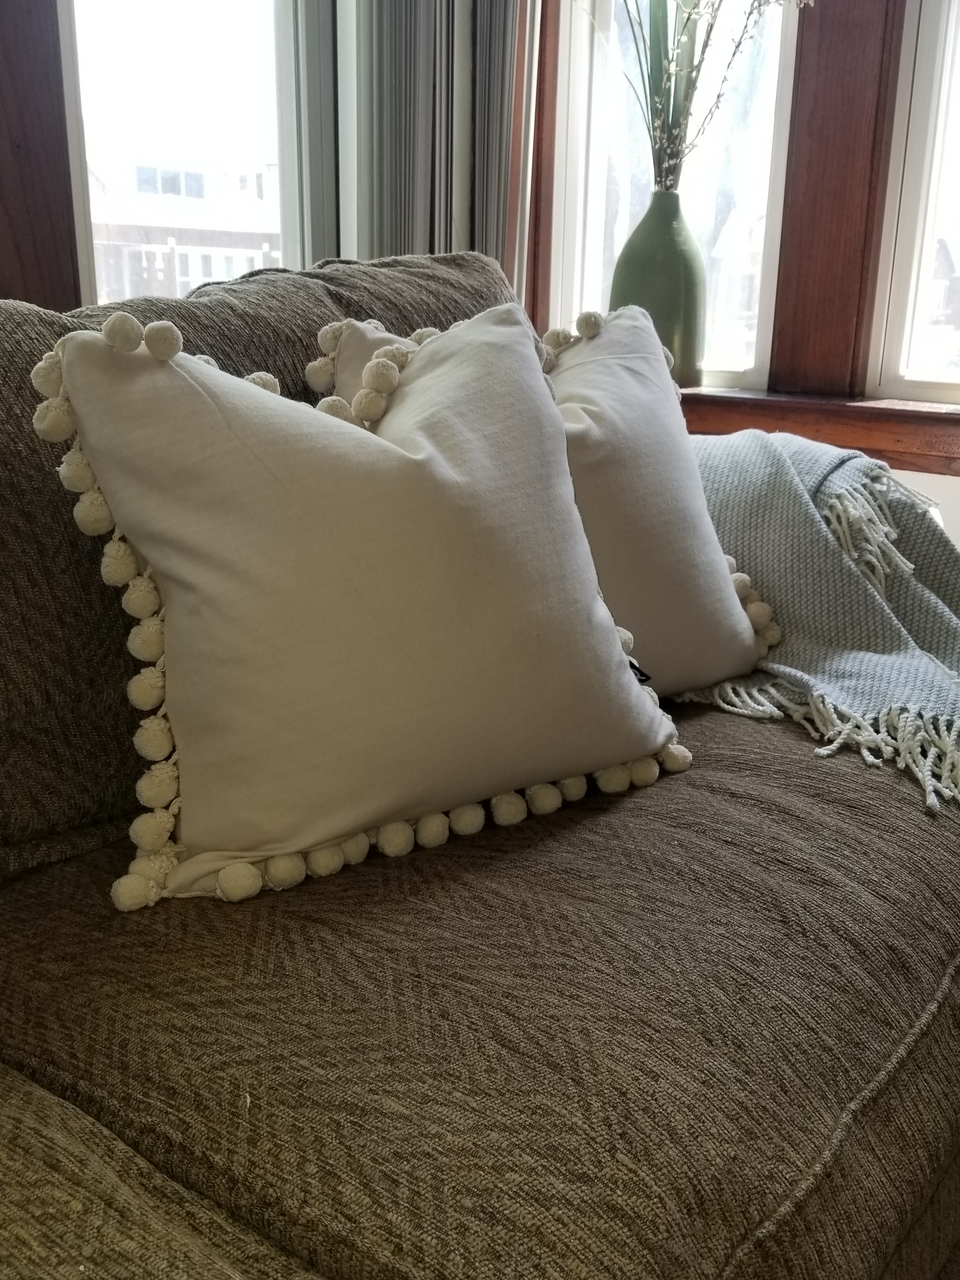 18 x 18 cream pom pom pillow covers on brown couch with beige throw cover